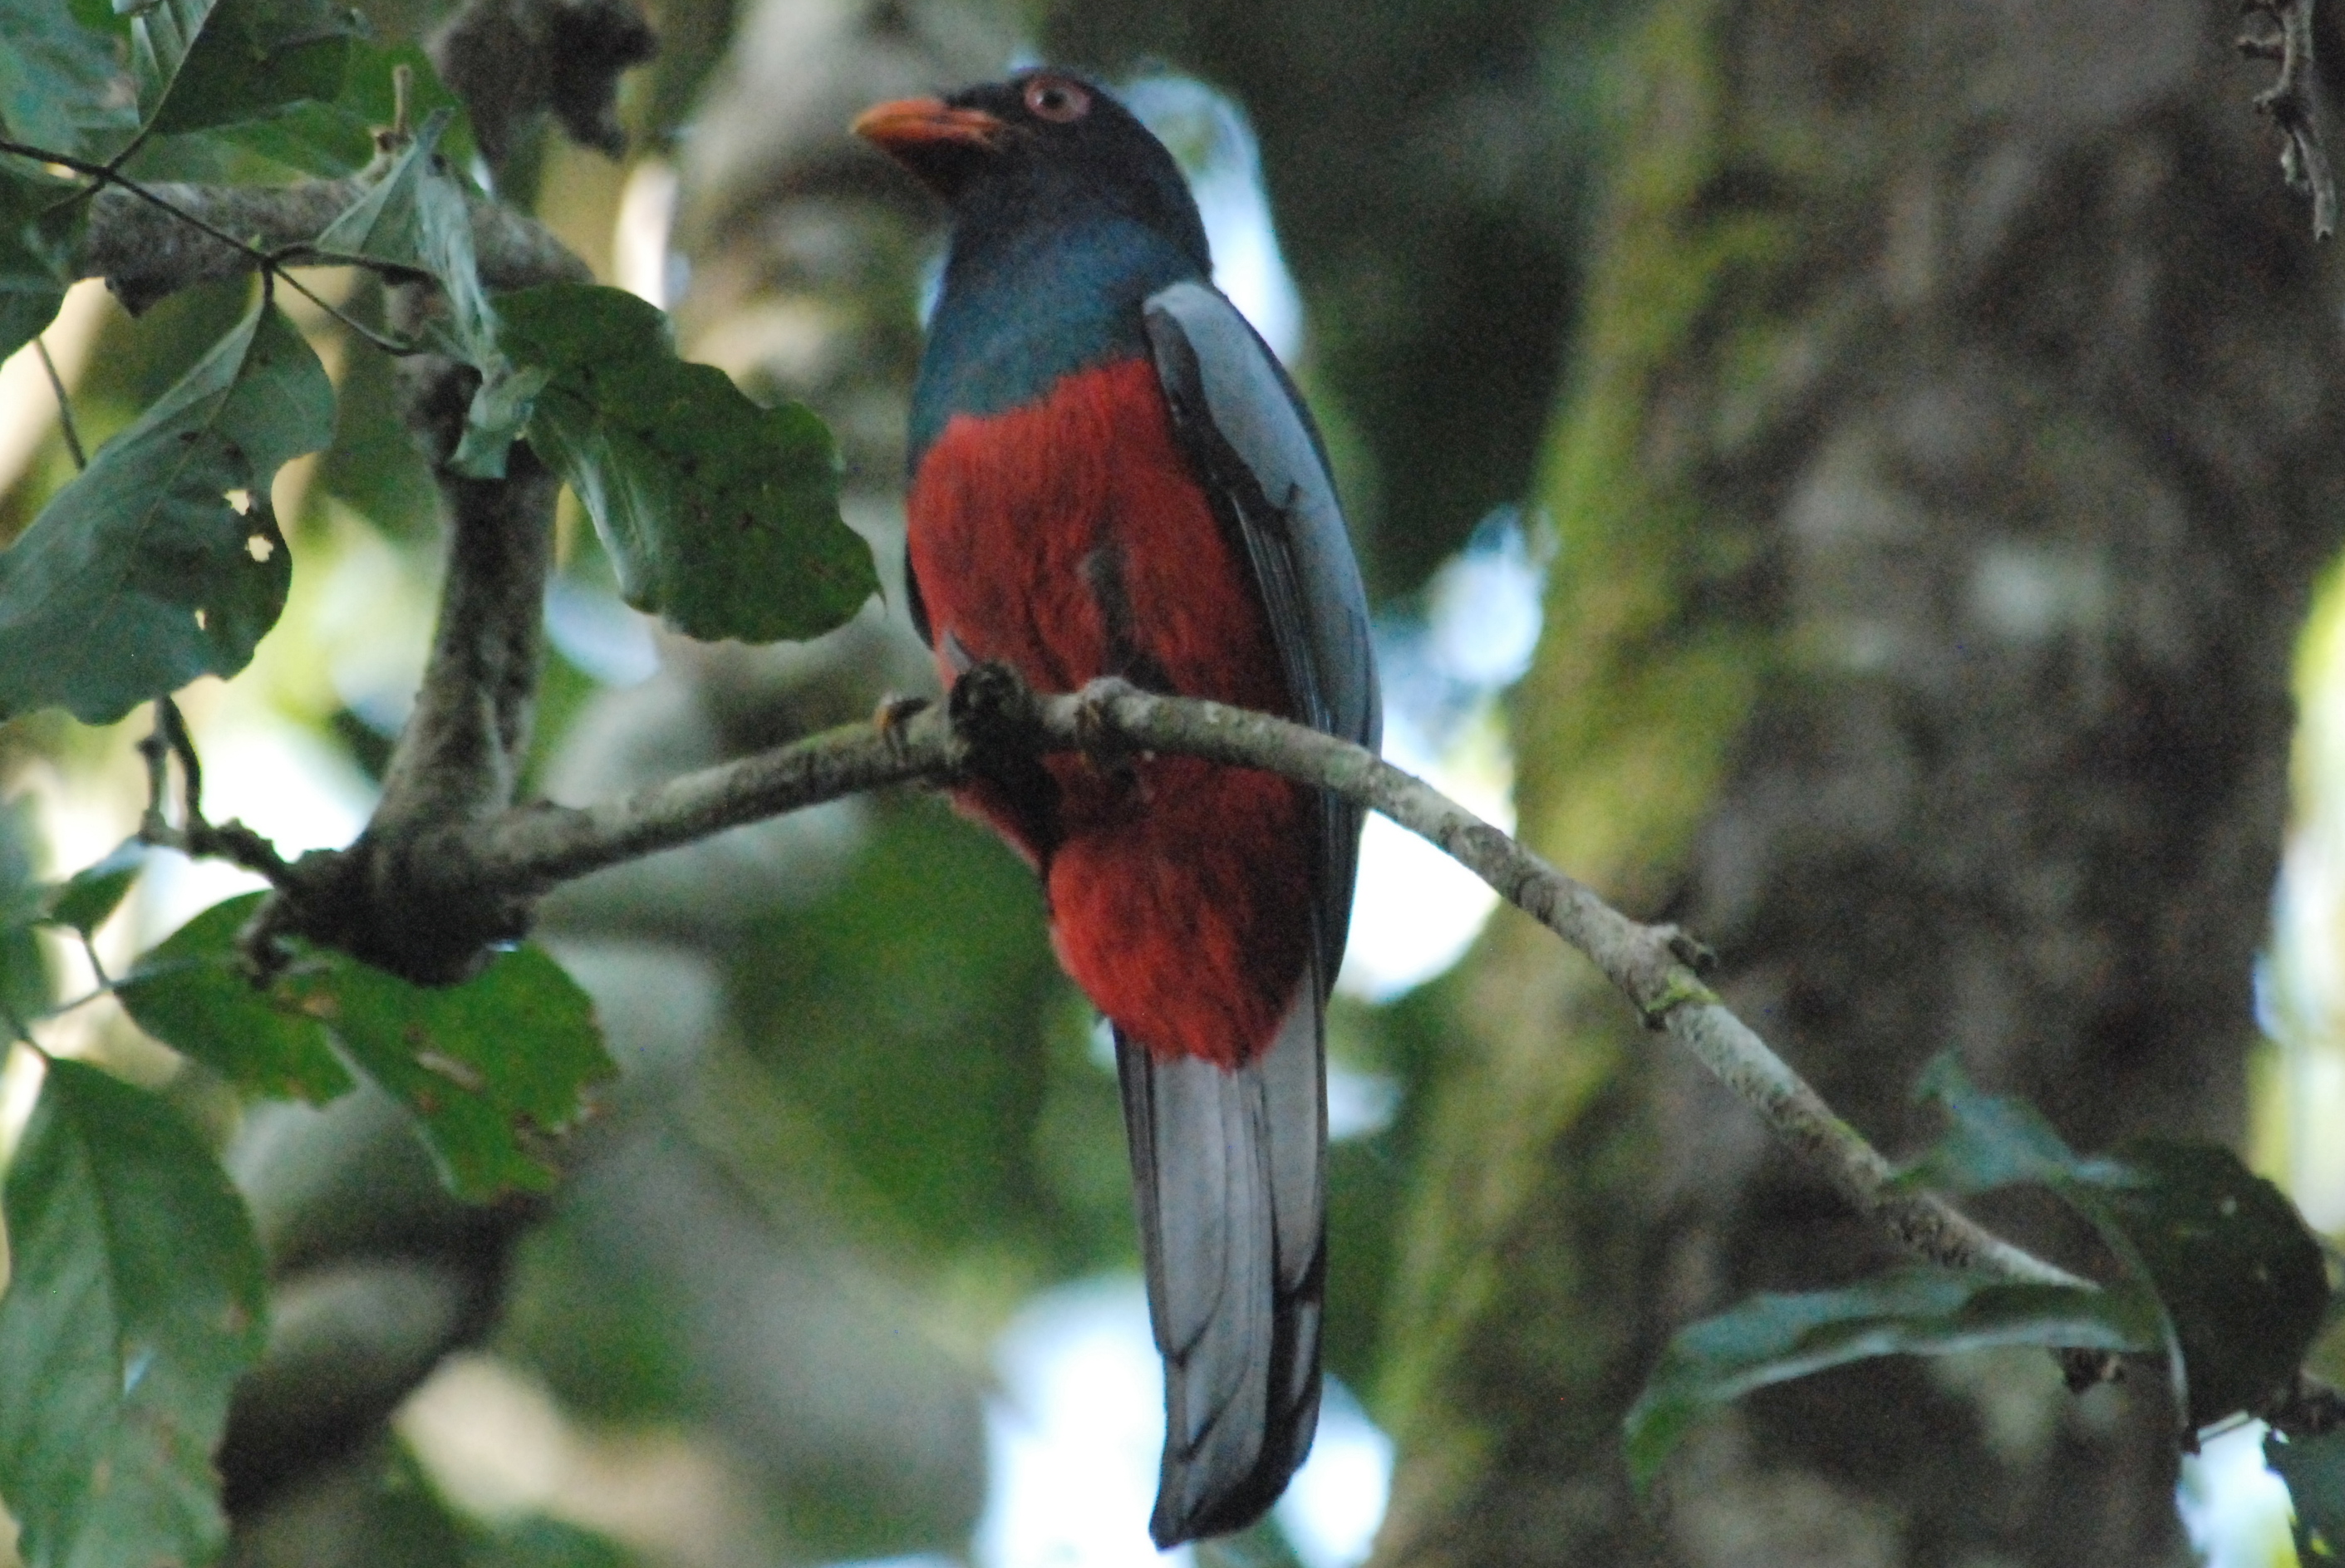 Click picture to see more Slaty-tailed Trogons.